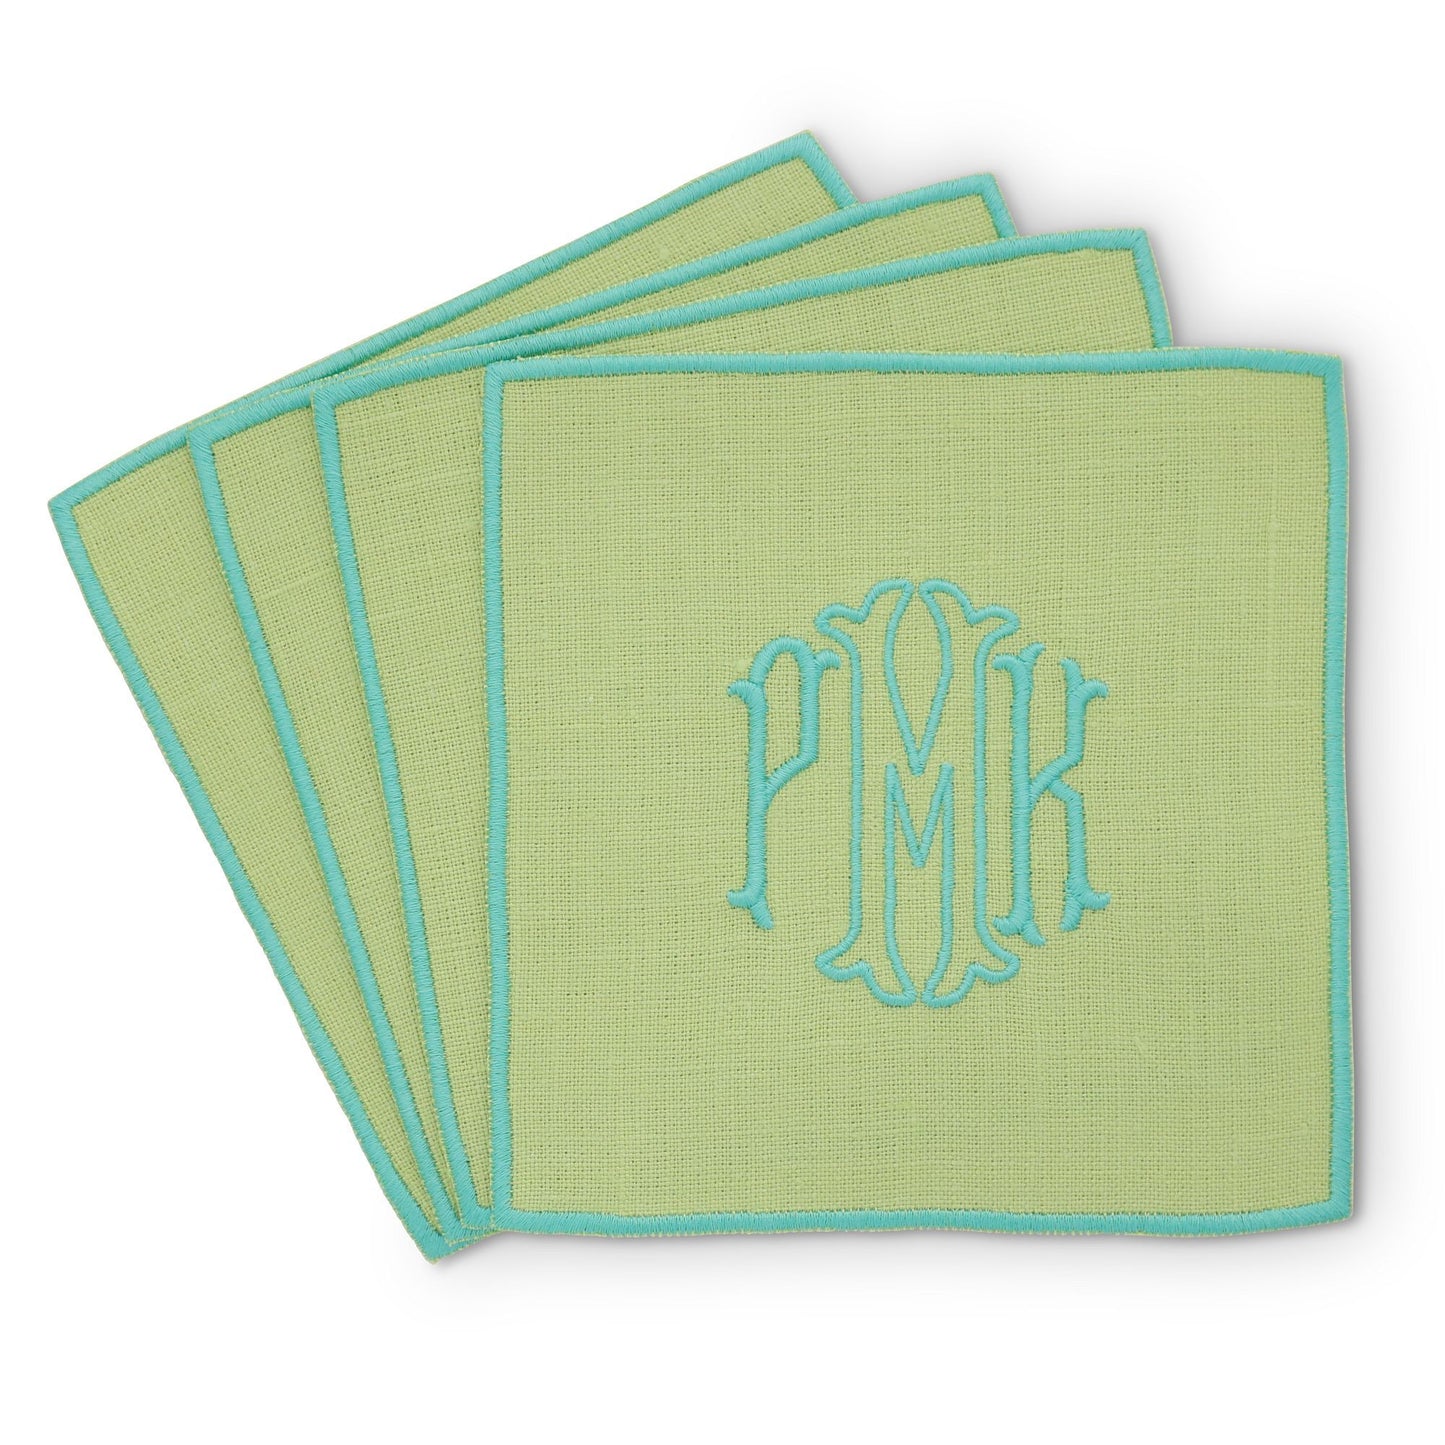 Made to order Turin Linen Cocktail Napkins (set of 4)